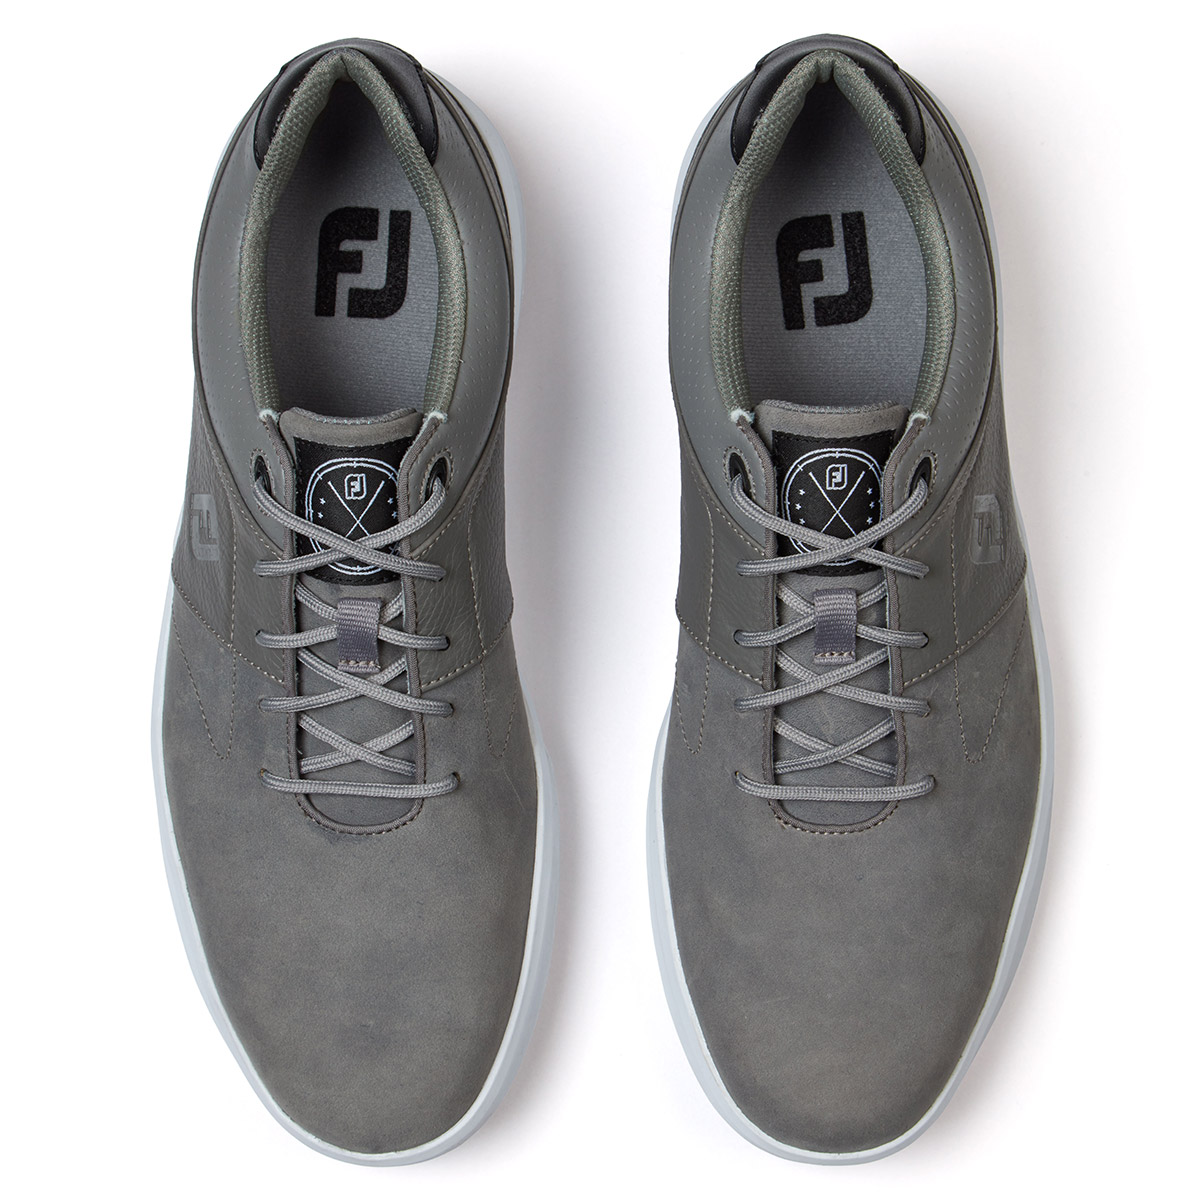 FootJoy Contour Shoes from american golf